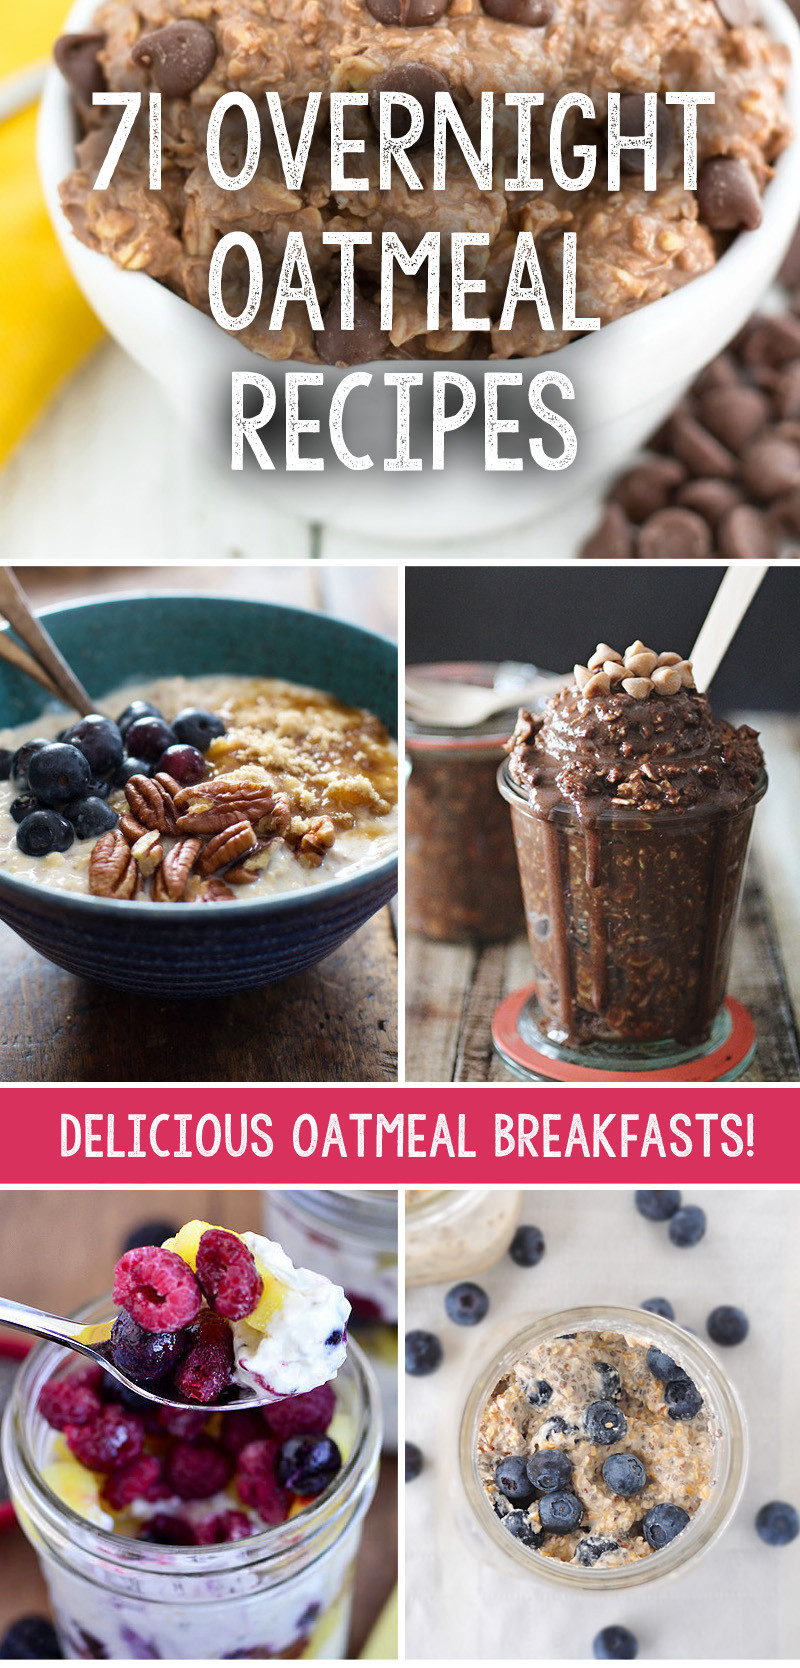 Oats For Weight Loss
 We have collected 71 incredible overnight oatmeal recipes